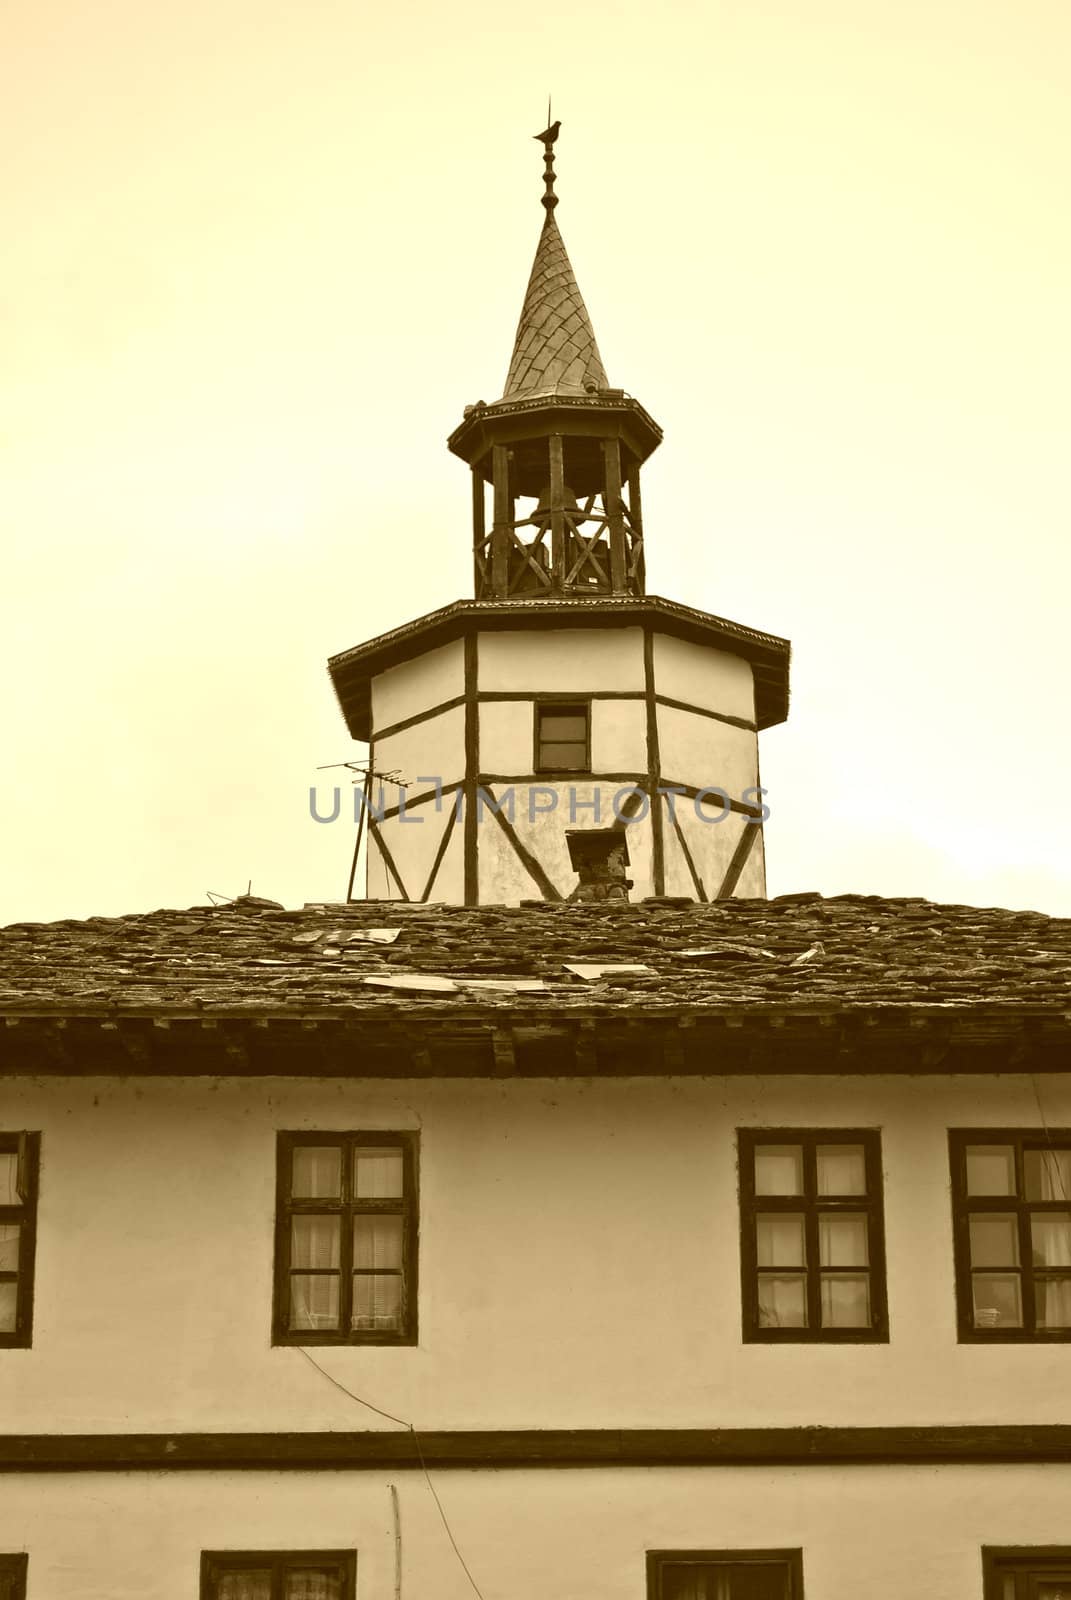 Tryavna and clock tower in sepia � old style historical city in North Bulgaria